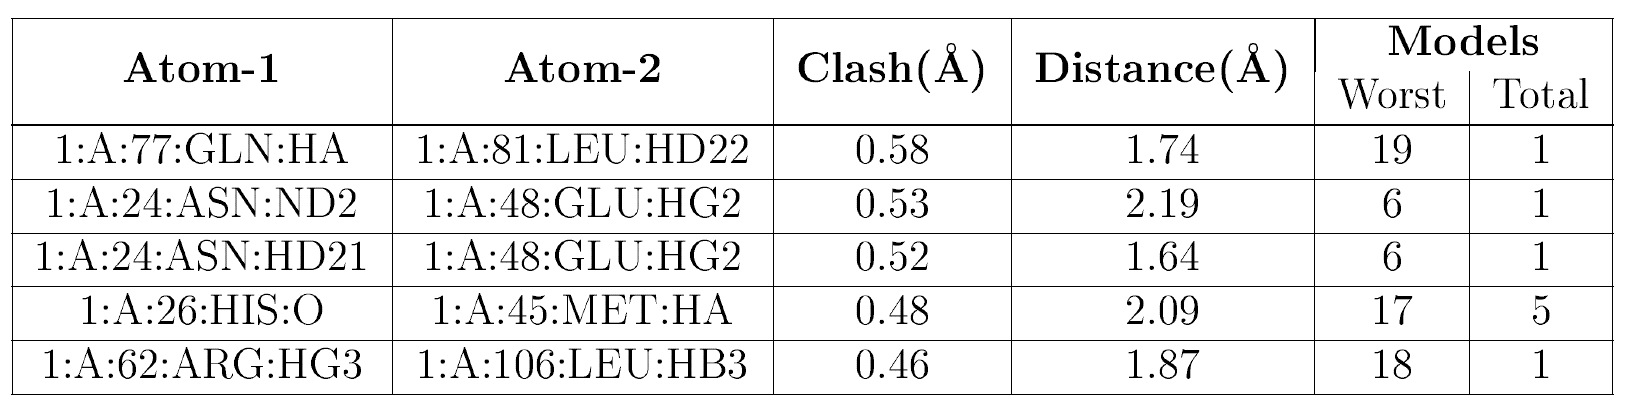 (image nmr table showing individual clashes)